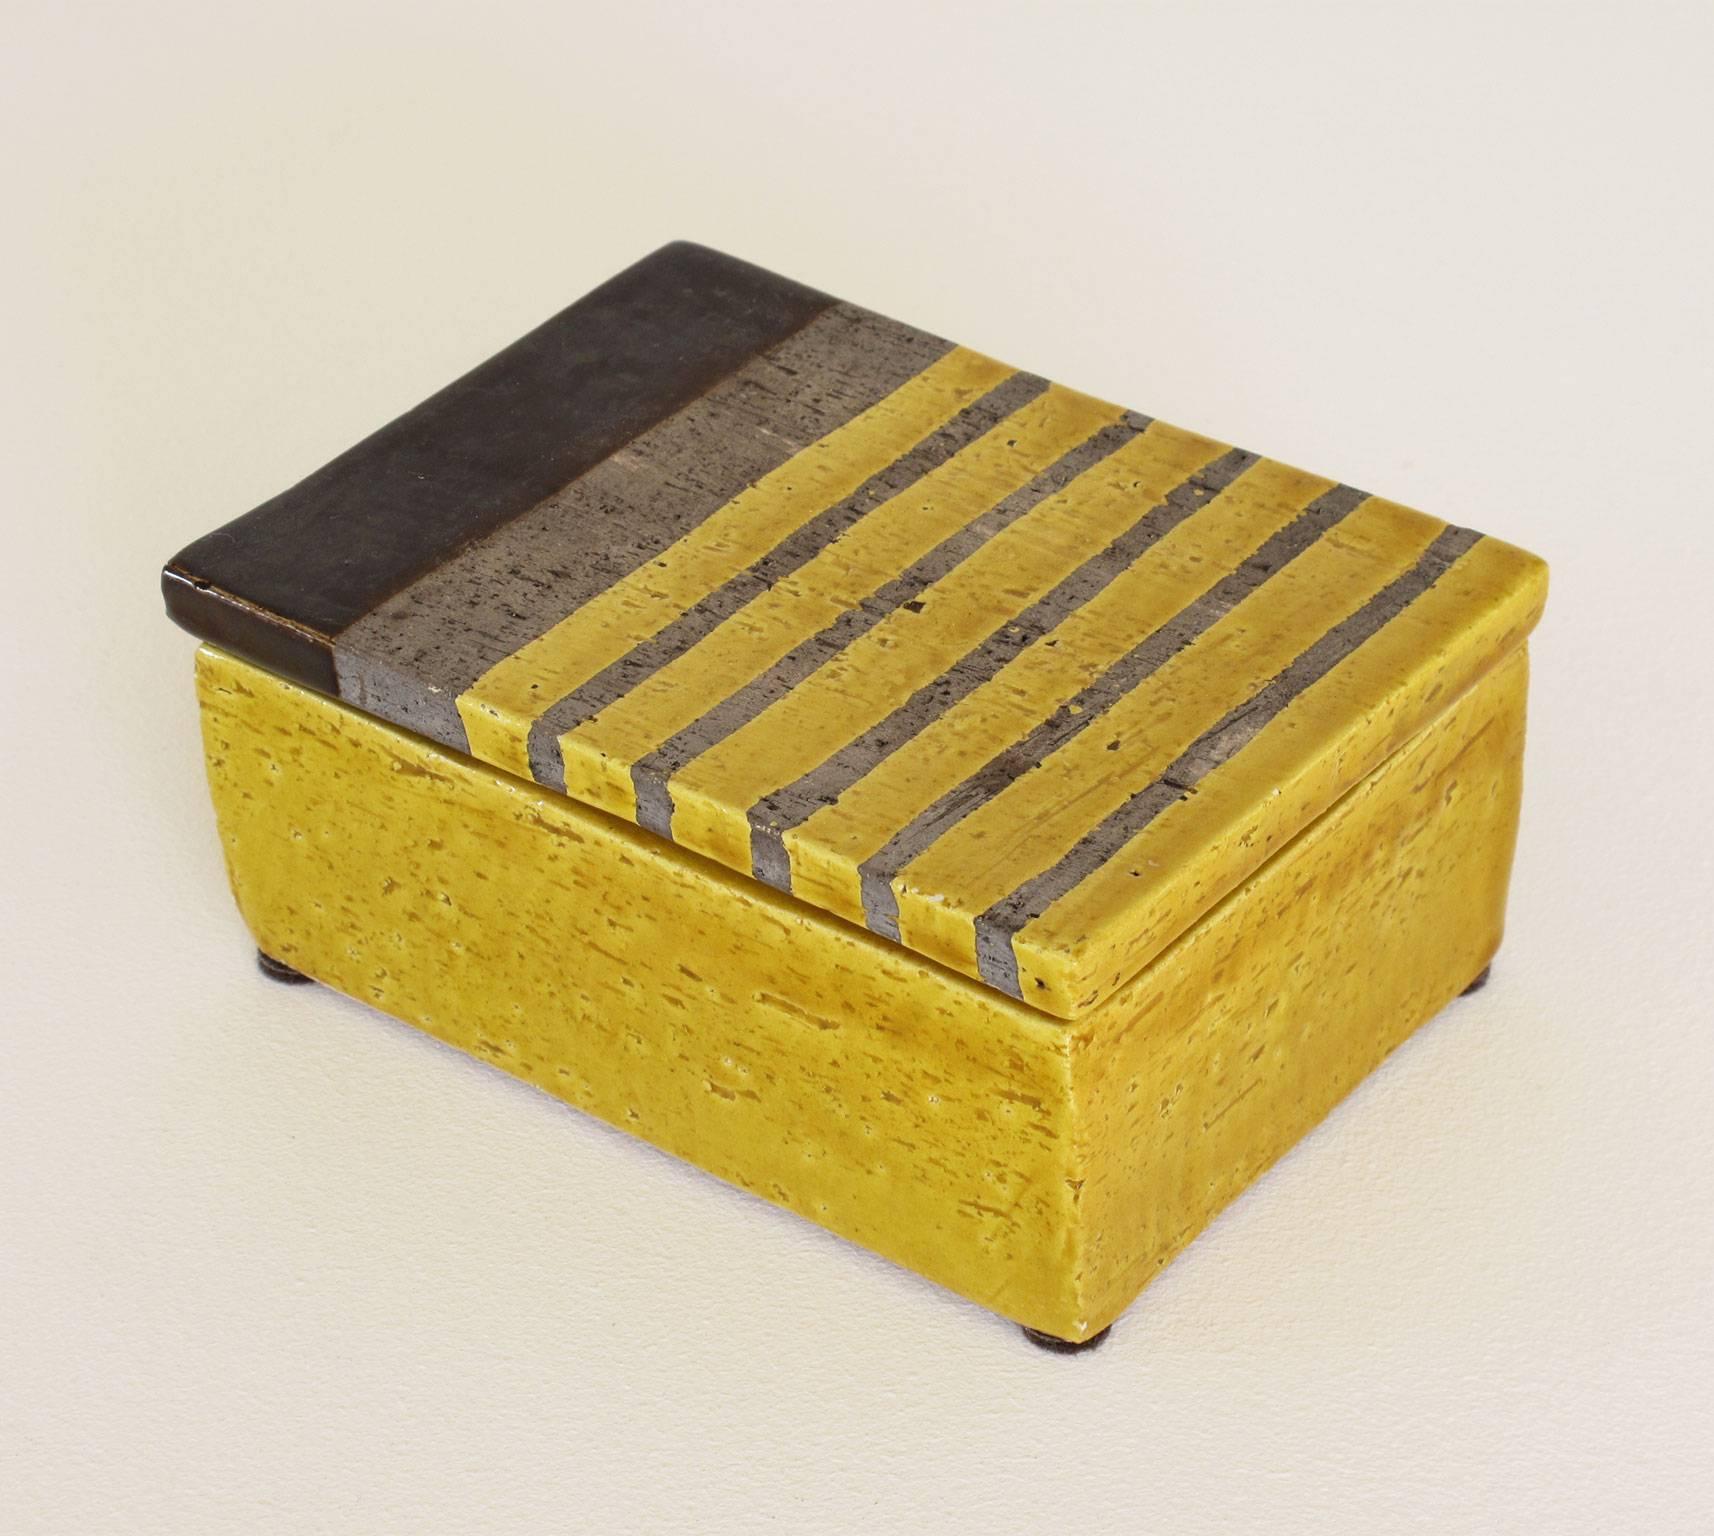 Handmade stoneware trinket stash box with brown and earth tones glazing, decorated with color blocking and striping over yellow, finished with a textured and glossy surface treatment, marked 'Italy' on bottom of box.

Dimensions: 2 1/4 high x 5